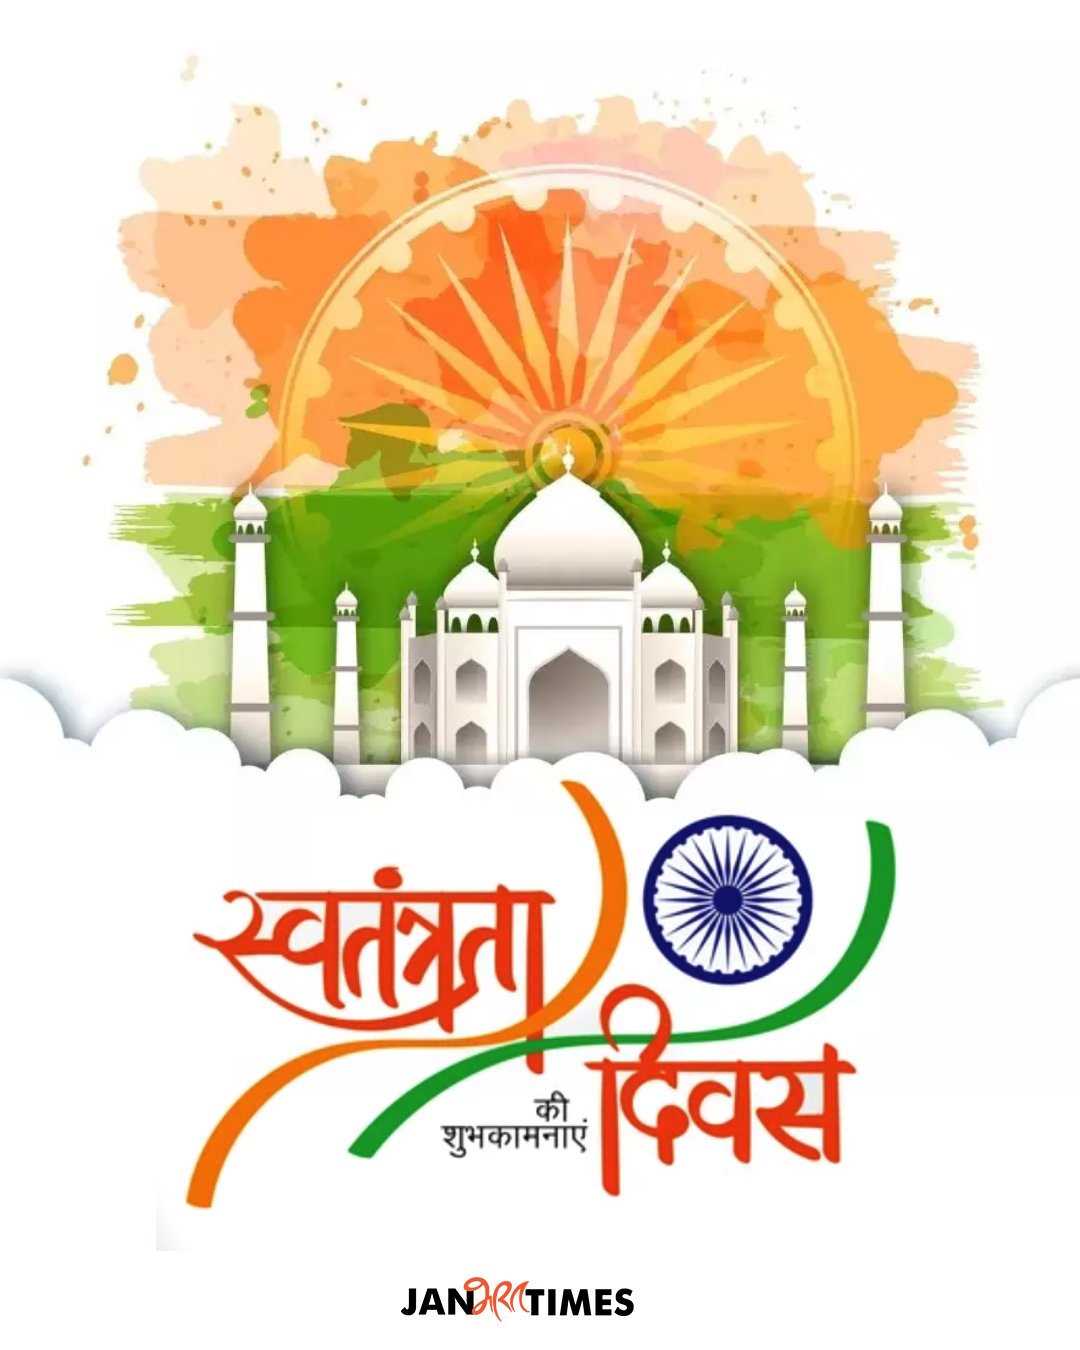 Happy Independence Day 2021 Best Wishes, Image, Quotes & Wallpaper